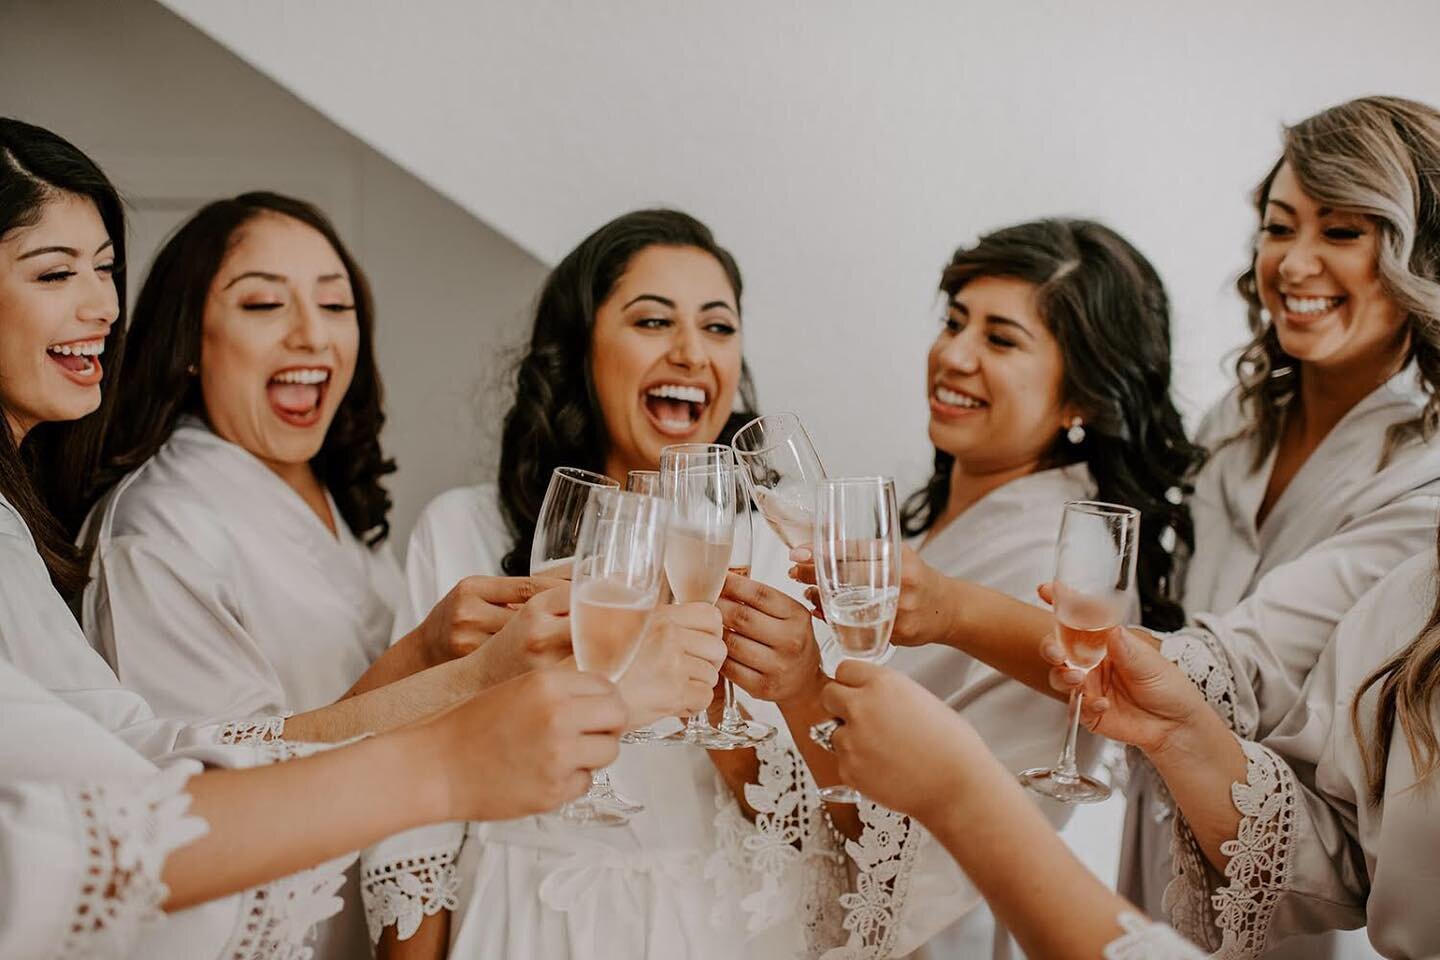 Cheers to Friday! 🥂 I don&rsquo;t know about any of you, but it&rsquo;s sure been a week. It&rsquo;s okay to pop the bubbles early and just call it a day, right? 😉 Have a great weekend, all!
📸 @sunshineshannon